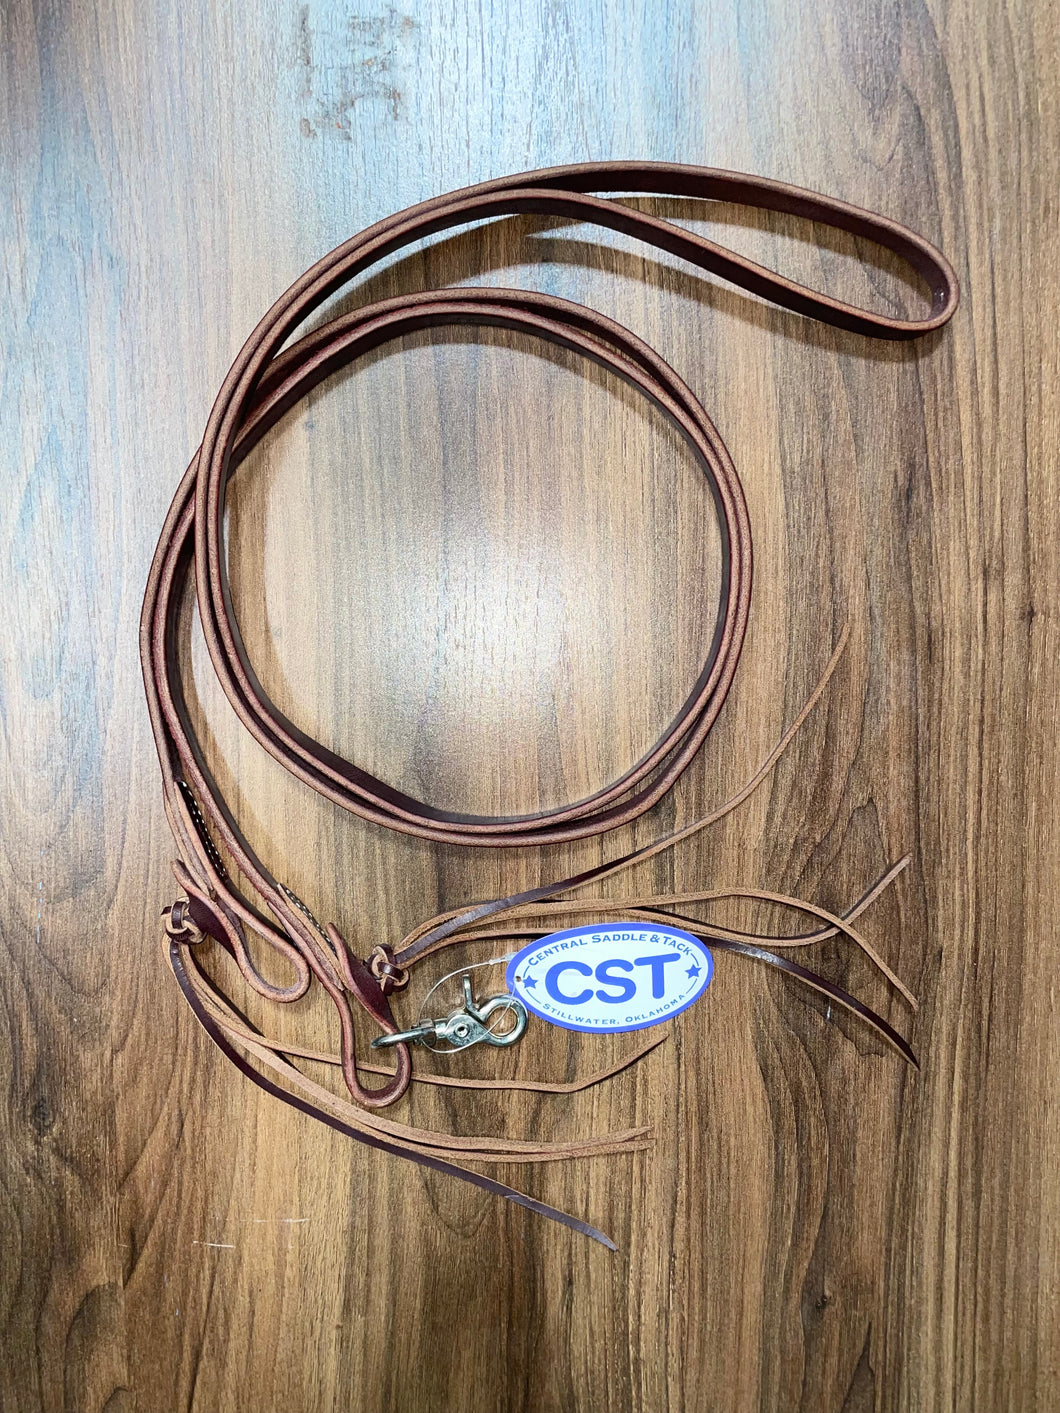 CST Latigo Leather Roping Reins - Pineapple Knot Ends